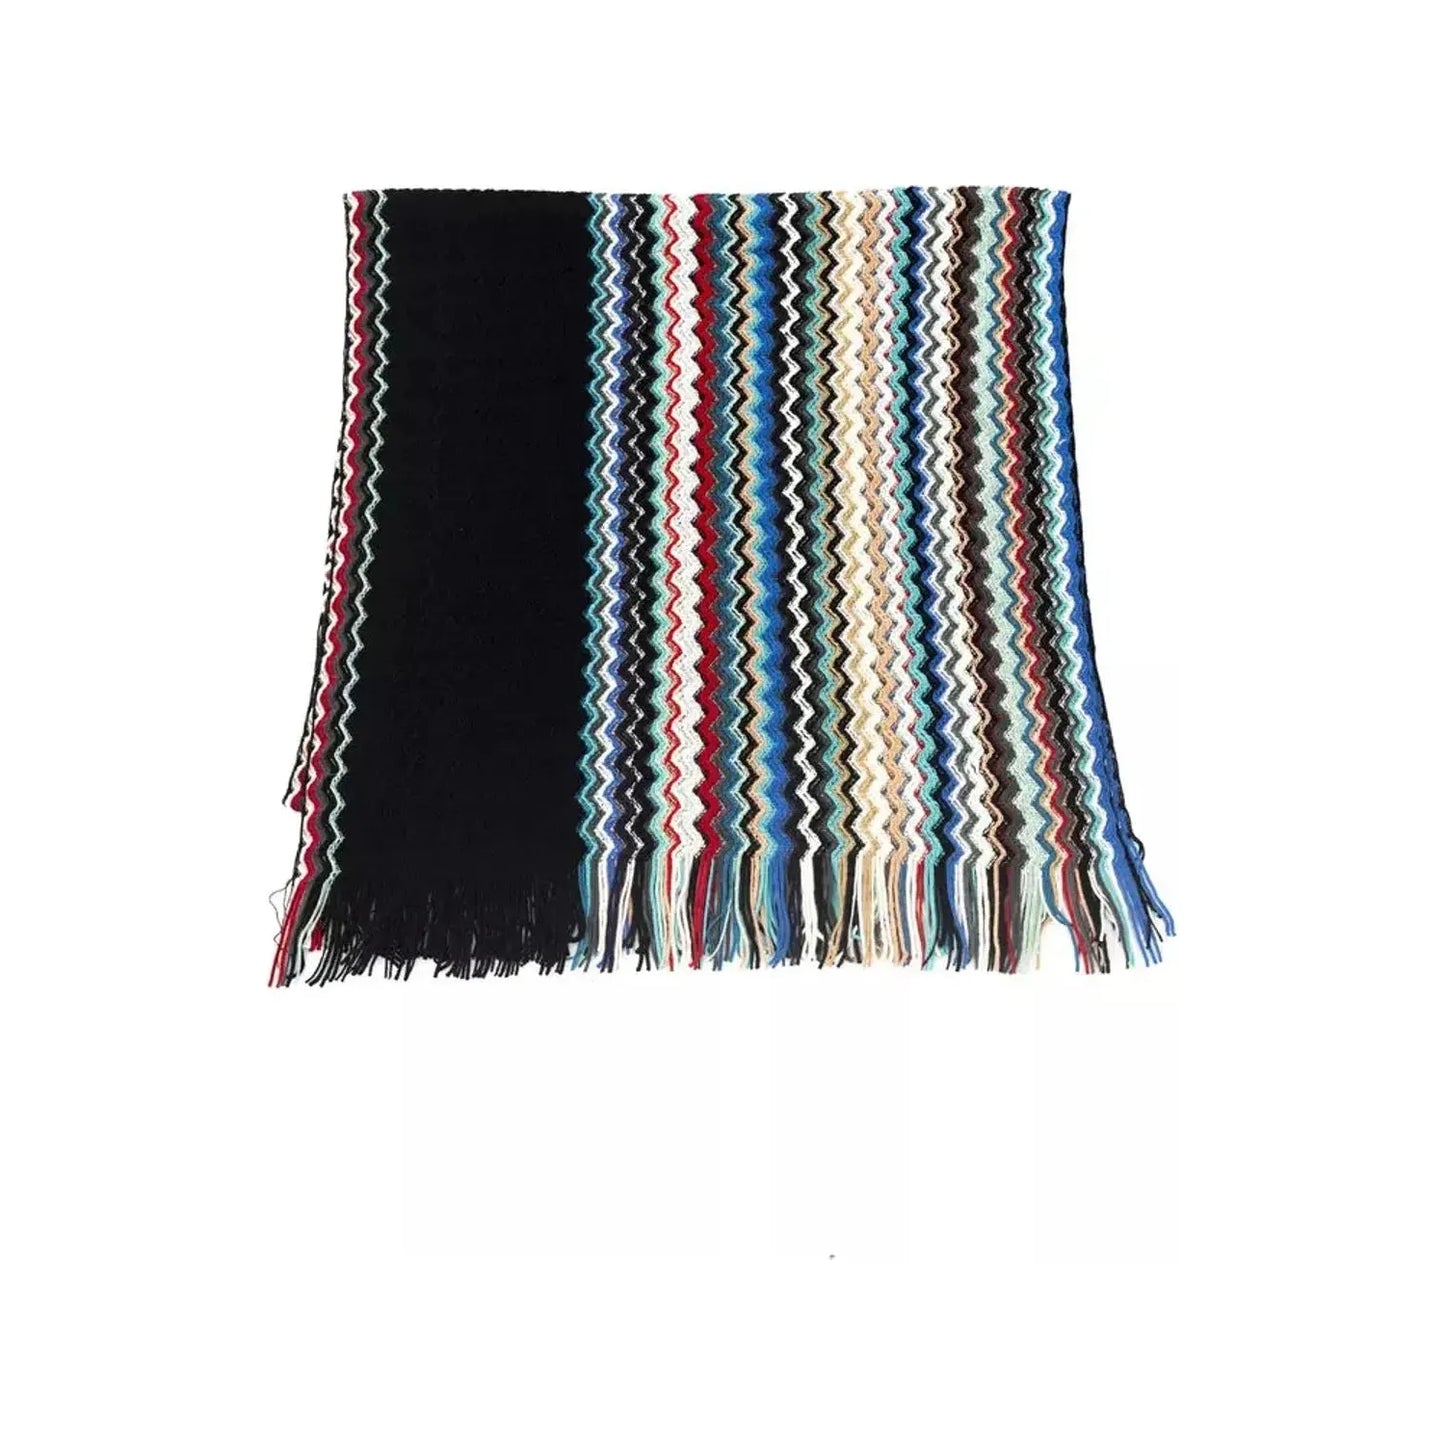 Missoni Geometric Fantasy Fringed Scarf Multicolor multicolor-wool-scarf-2 product-22226-1349455216-25-8eaa7a4d-095.webp